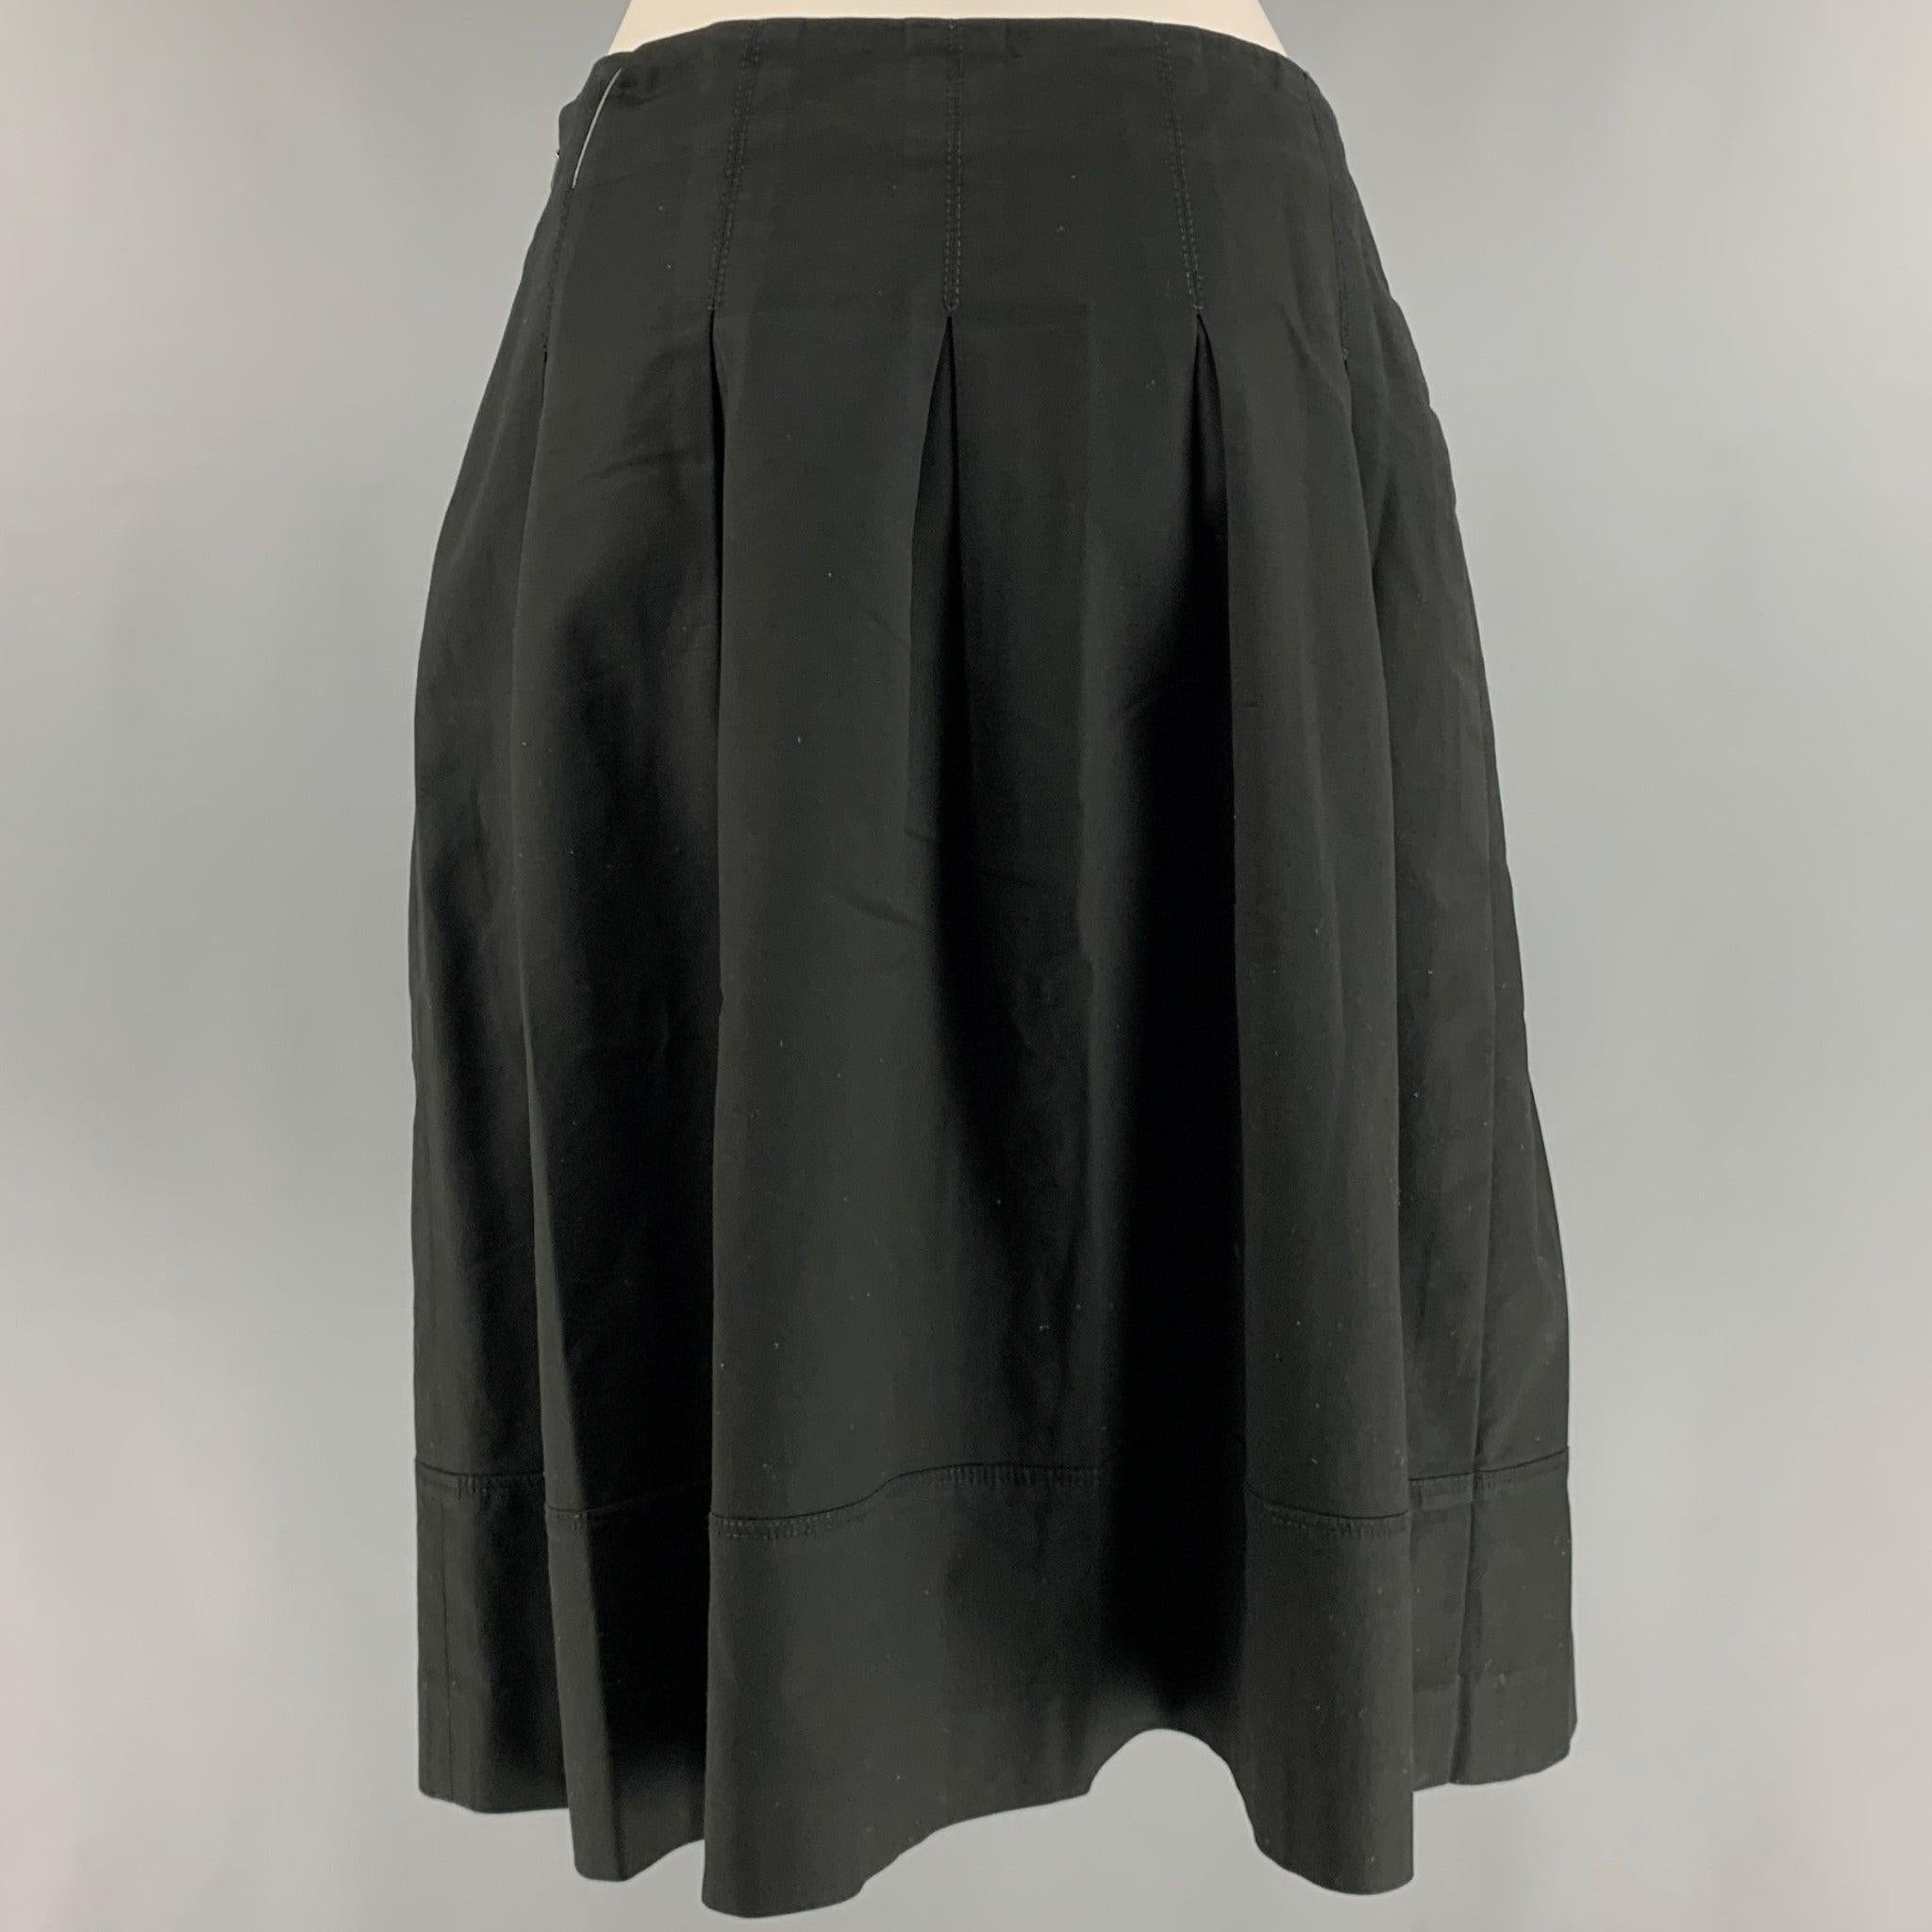 BURBERRY LONDON skirt
in a black fabric featuring a pleated style, and side zipper closure. This item has been altered.Very Good Pre-Owned Condition. Missing eye of eye & hook closure. 

Marked:   6 

Measurements: 
  Waist: 28.5 inches Hip: 46